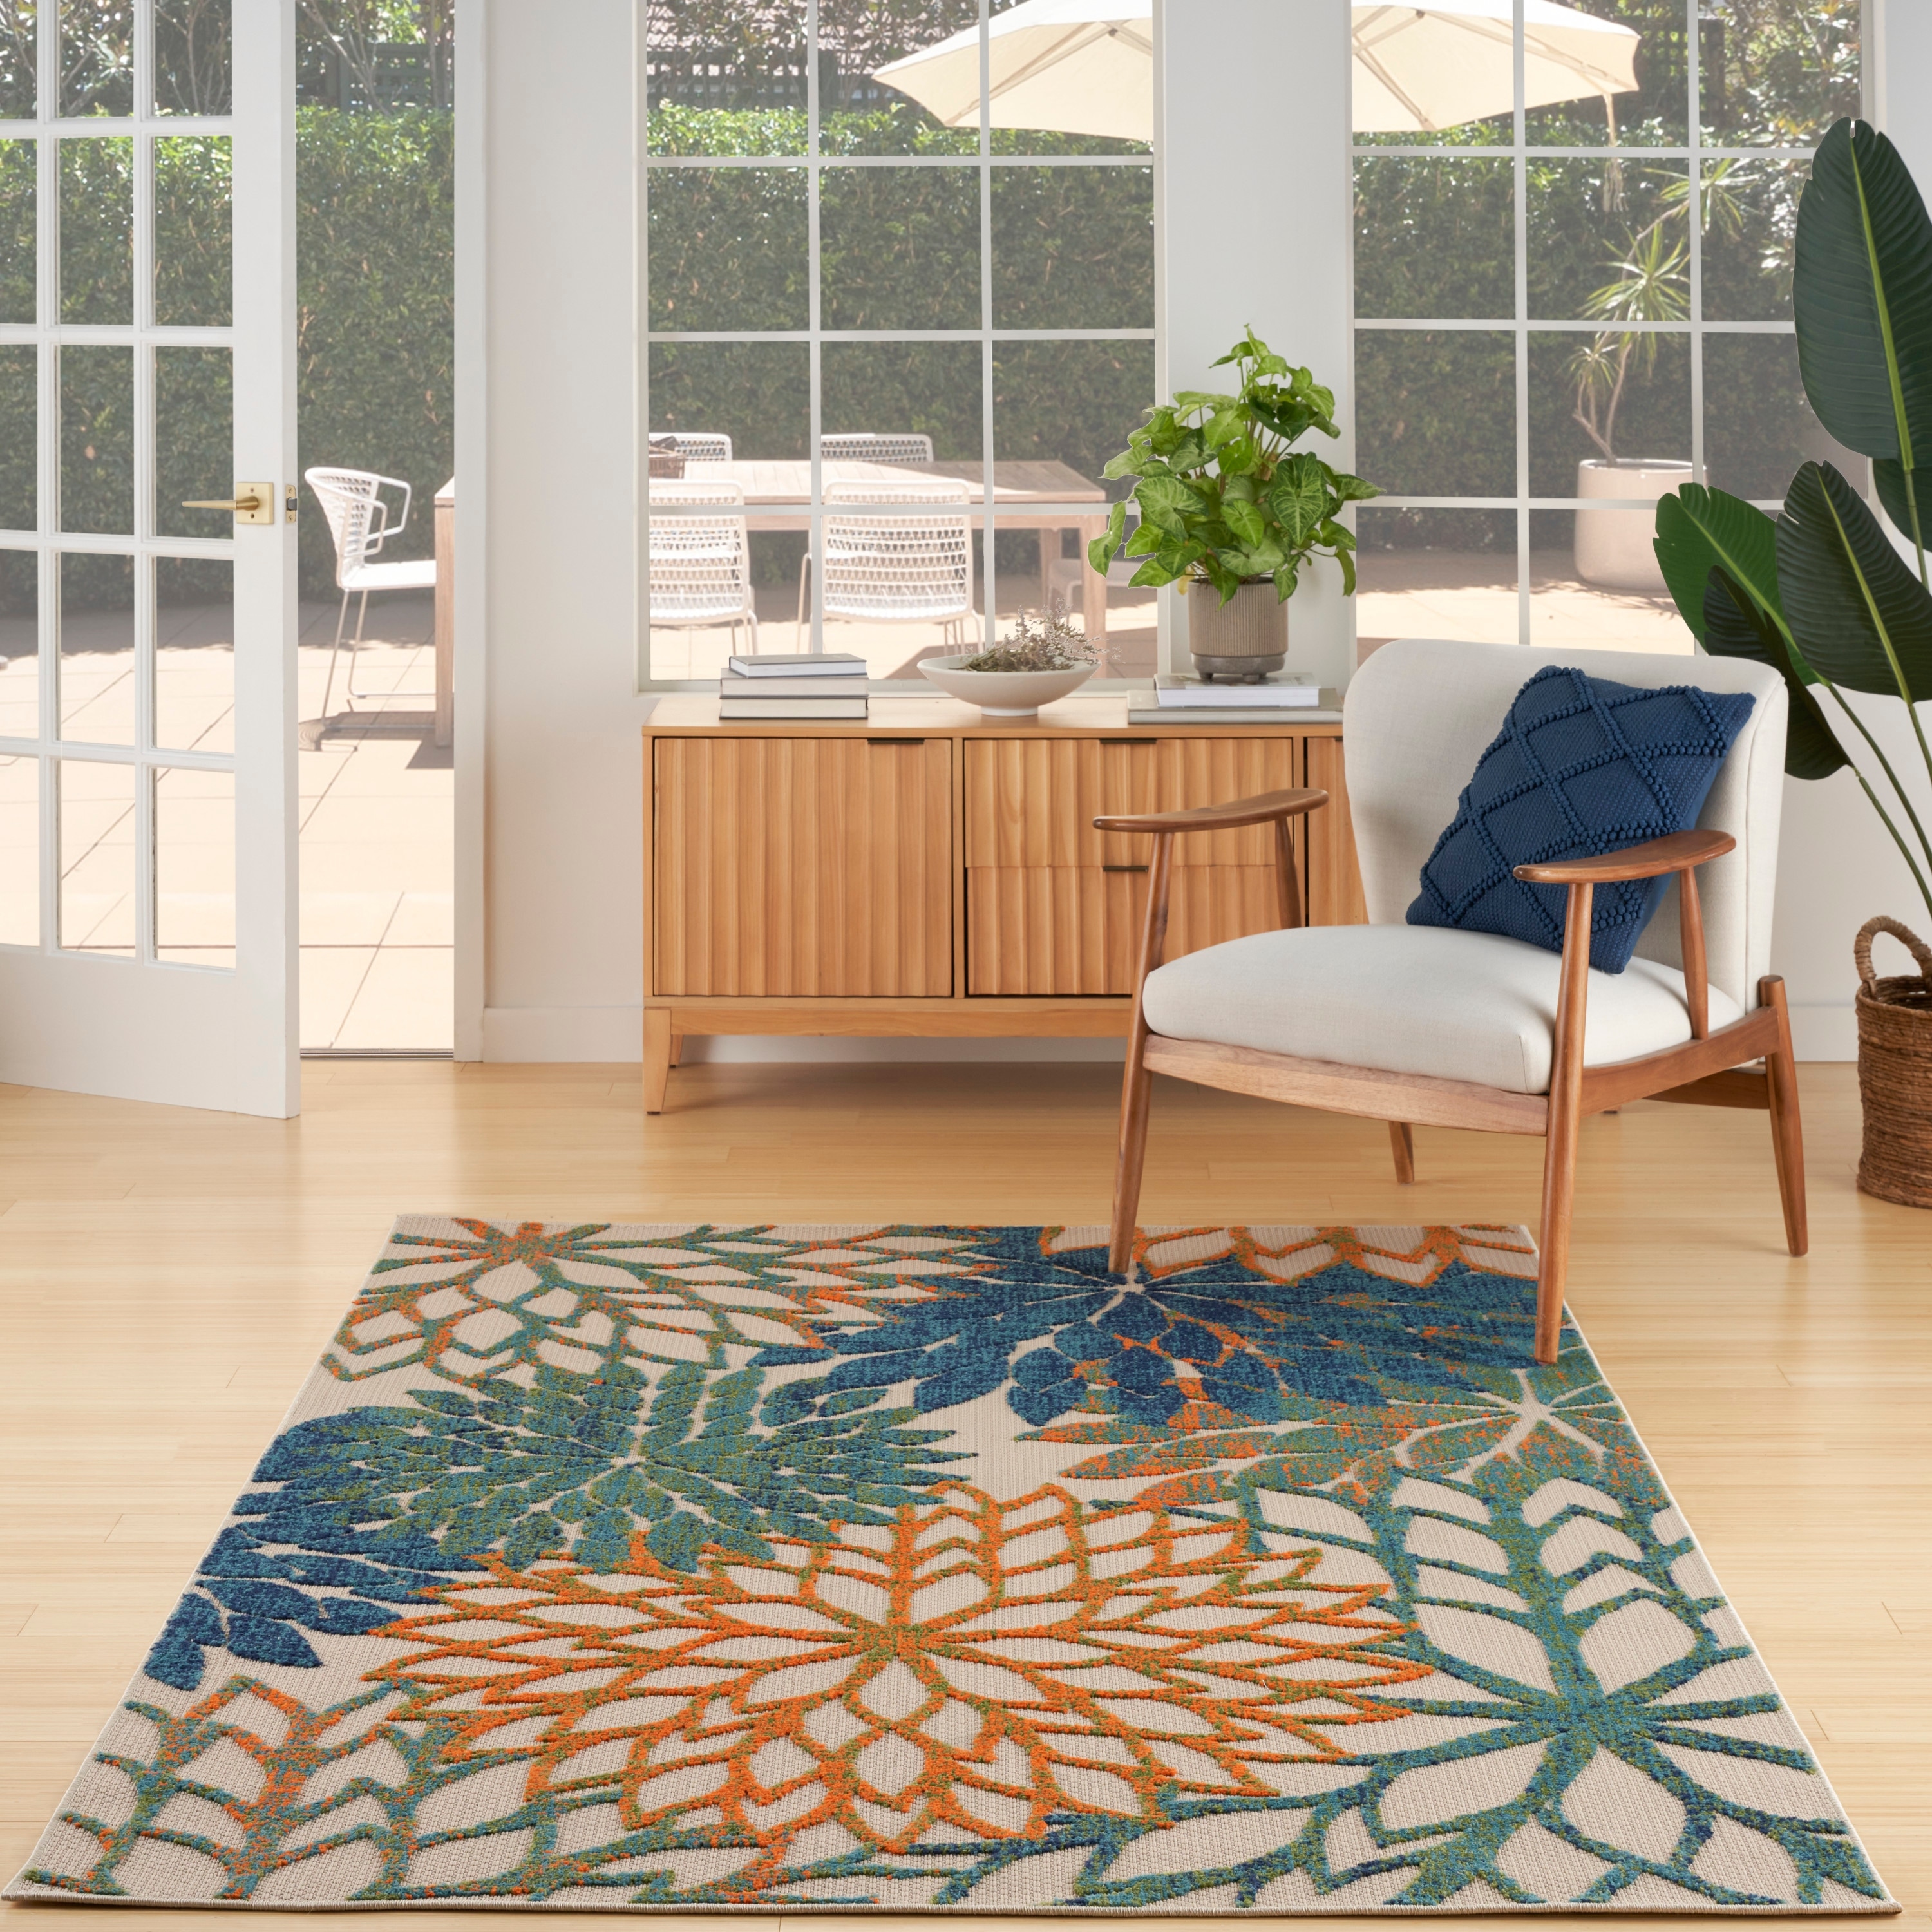 https://ak1.ostkcdn.com/images/products/is/images/direct/5135eed240cfc861dac8614ff2e3b9fd7036e215/Nourison-Aloha-Floral-Modern-Indoor-Outdoor-Area-Rug.jpg